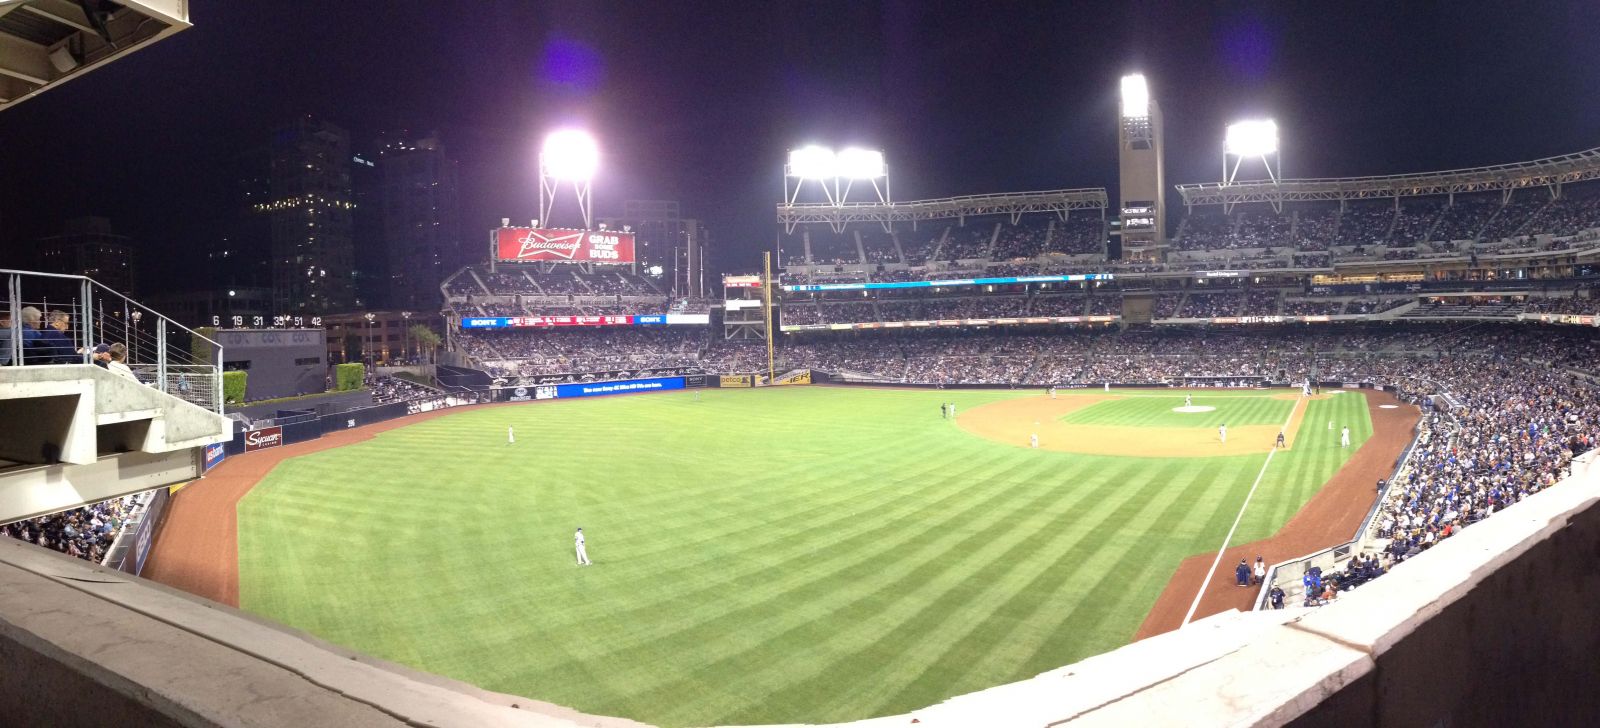 section 224, row 1 seat view  for baseball - petco park